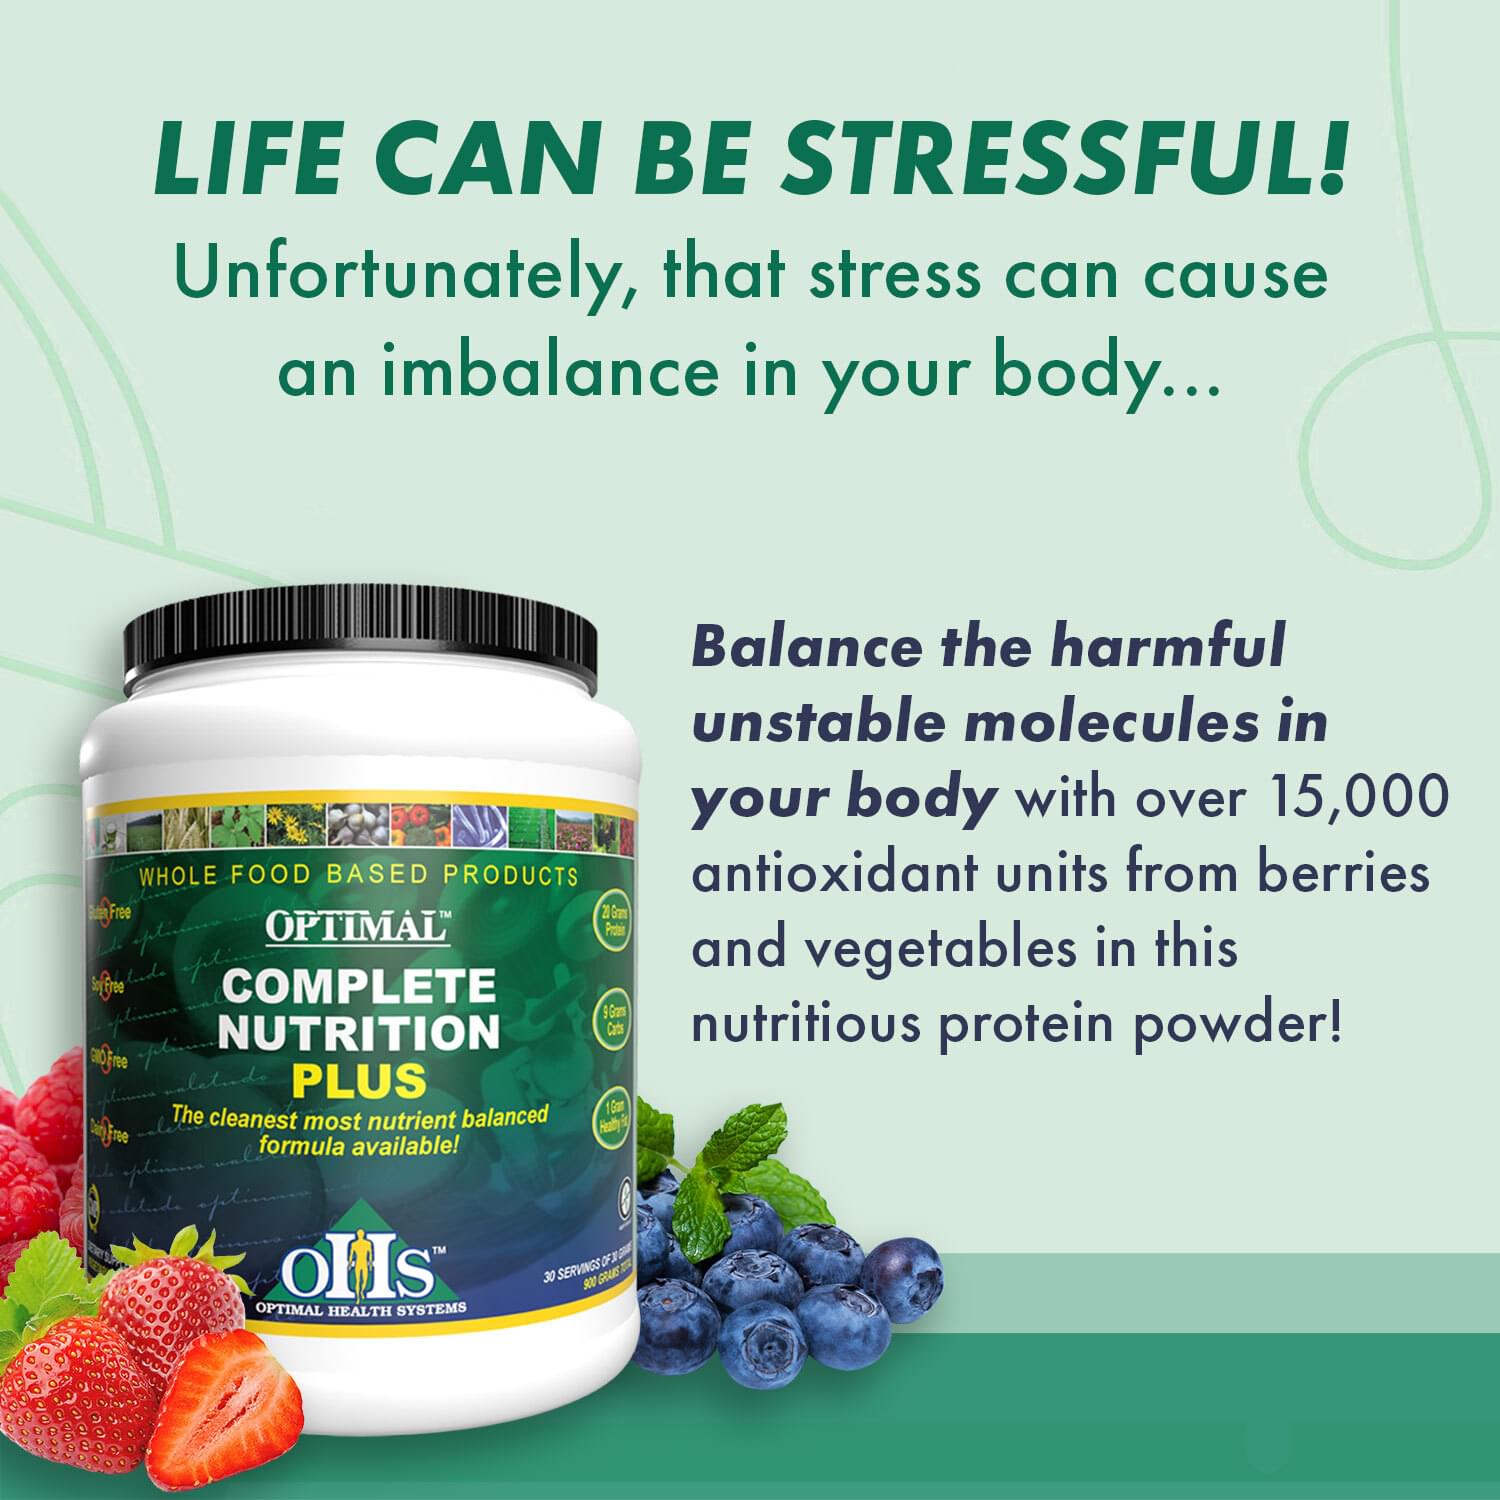 stress can cause an imbalance in the body